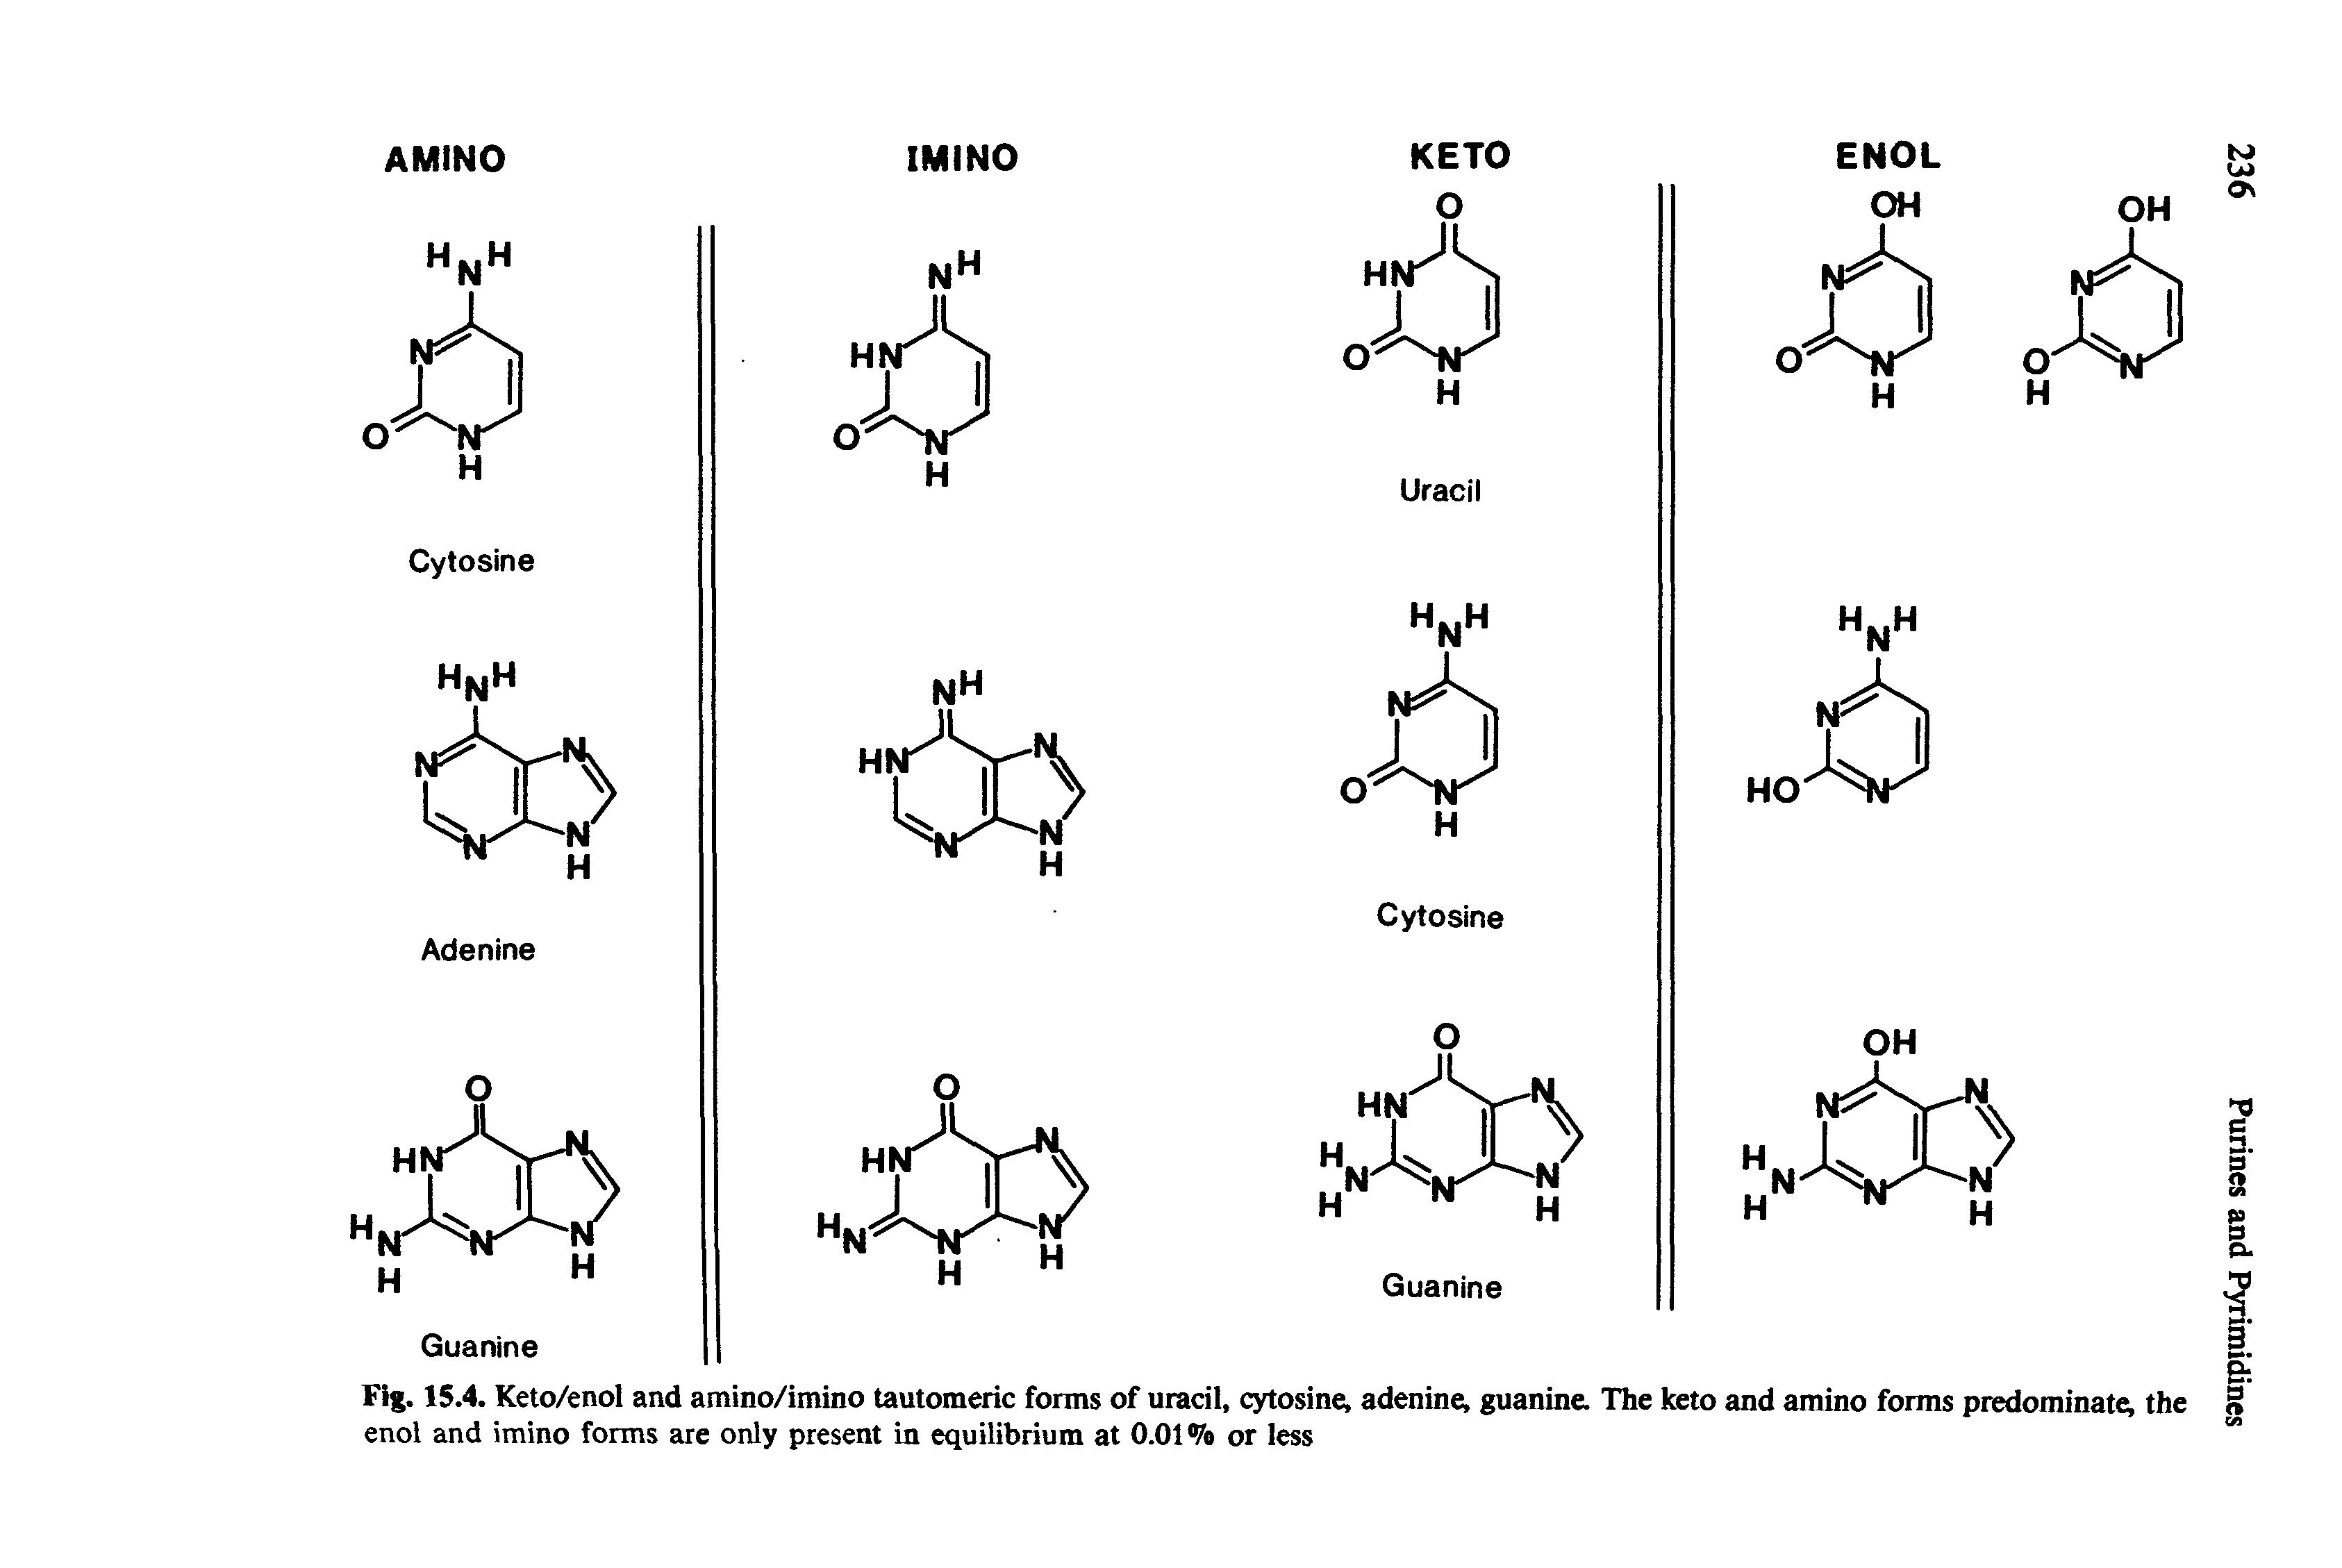 Fig. 15.4. Keto/enol and amino/imino tautomeric forms of uracil, cytosine, adenine, guanine. The keto and amino forms predominate, the enol and imino forms are only present in equilibrium at 0.01 Vo or less...